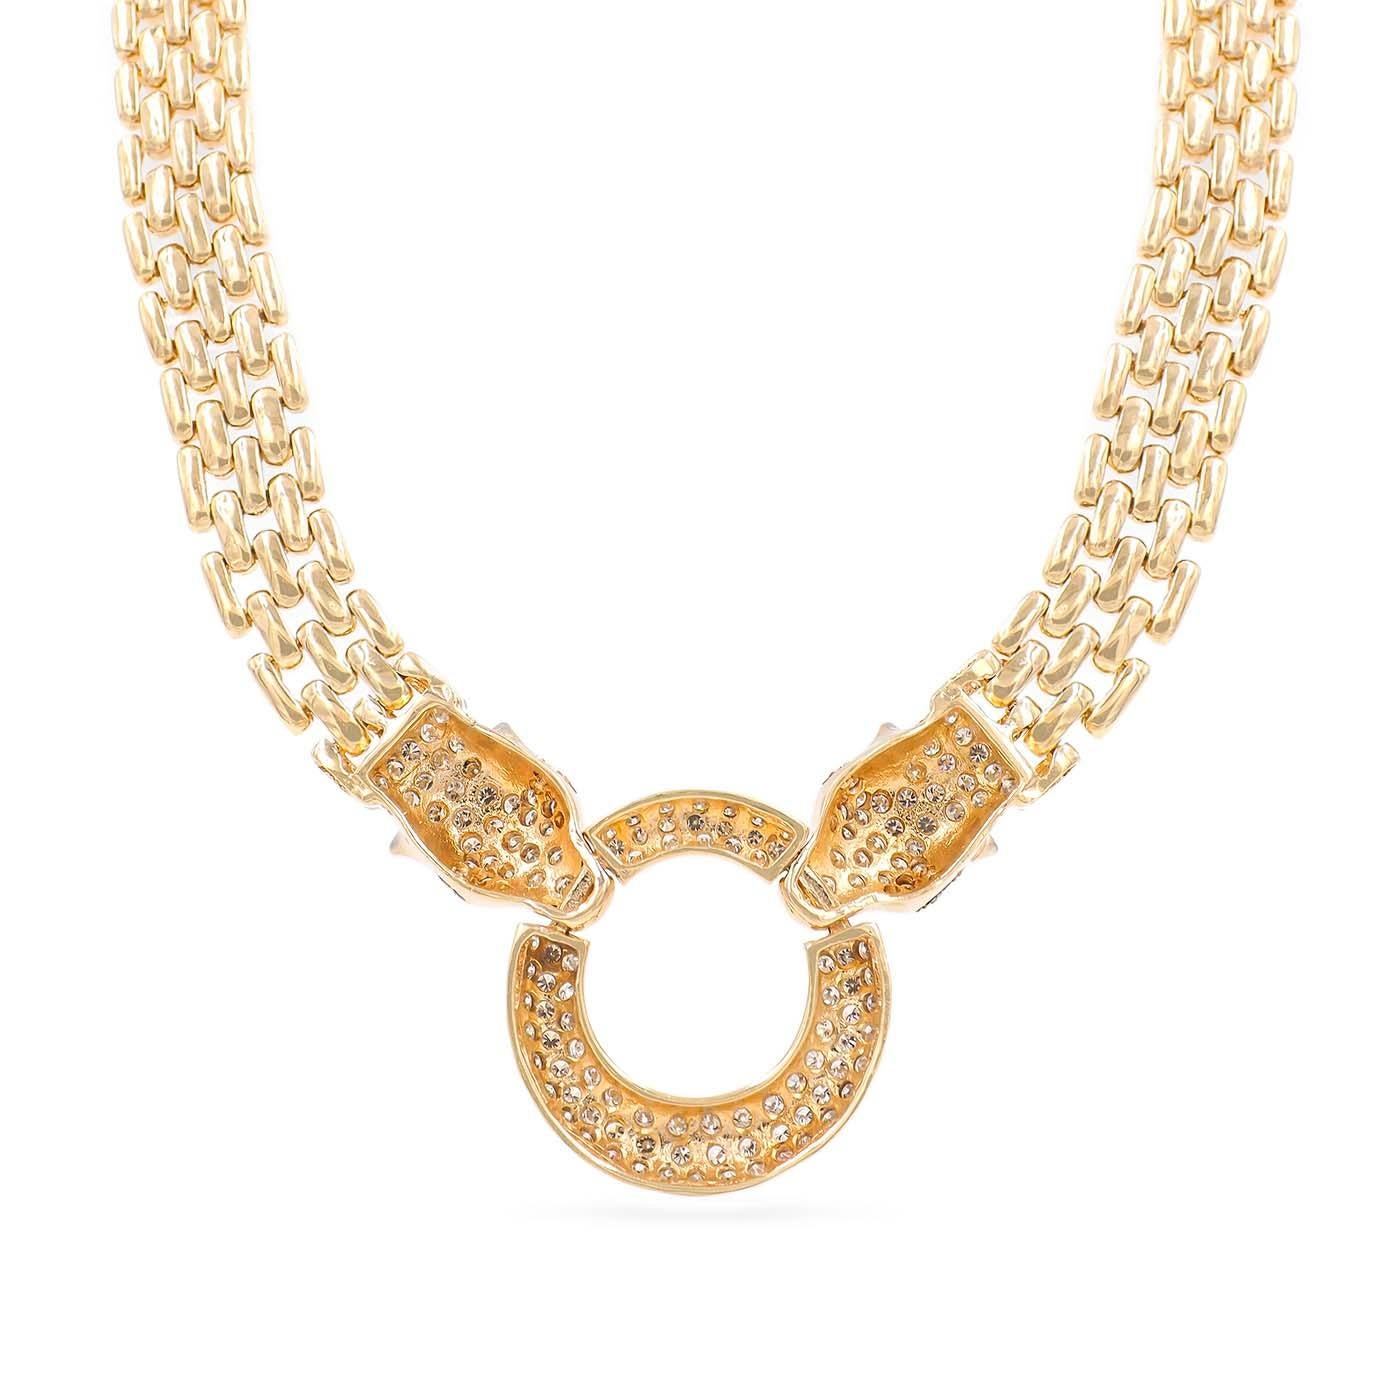 Vintage Diamond & Gold Panthère-Style Necklace composed of 14k yellow gold. With a diamond-set circle flanked by two 3D panther heads, also set with diamonds. Total diamond carat weight is 2.75 carats. With 'Panthère' style links. Measuring